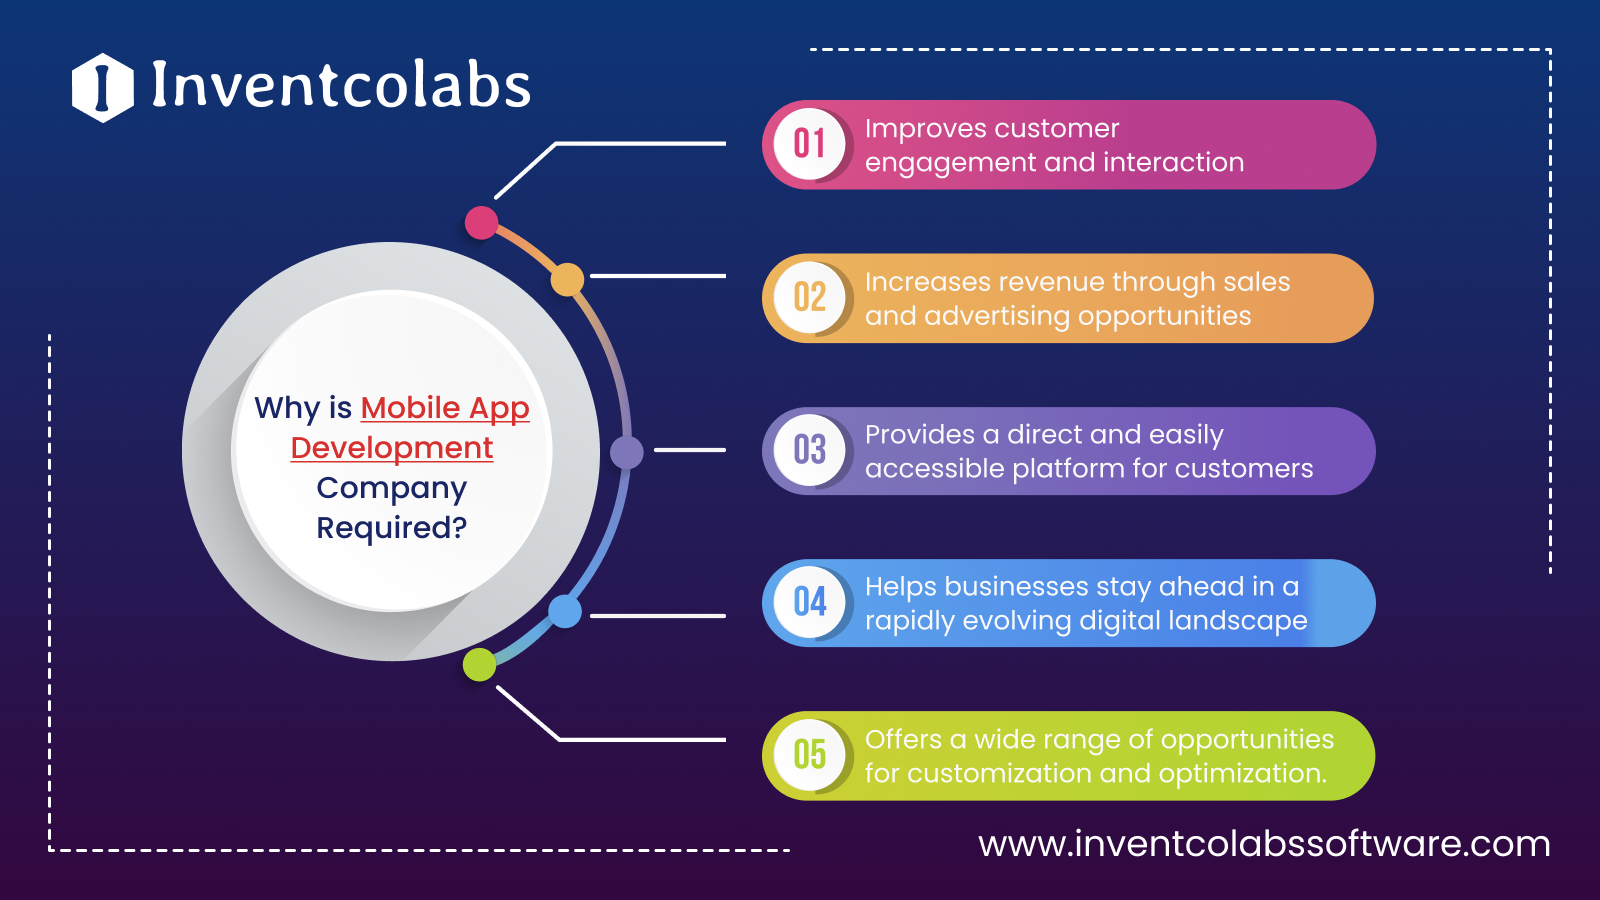 Why is Mobile App Development Company Required?